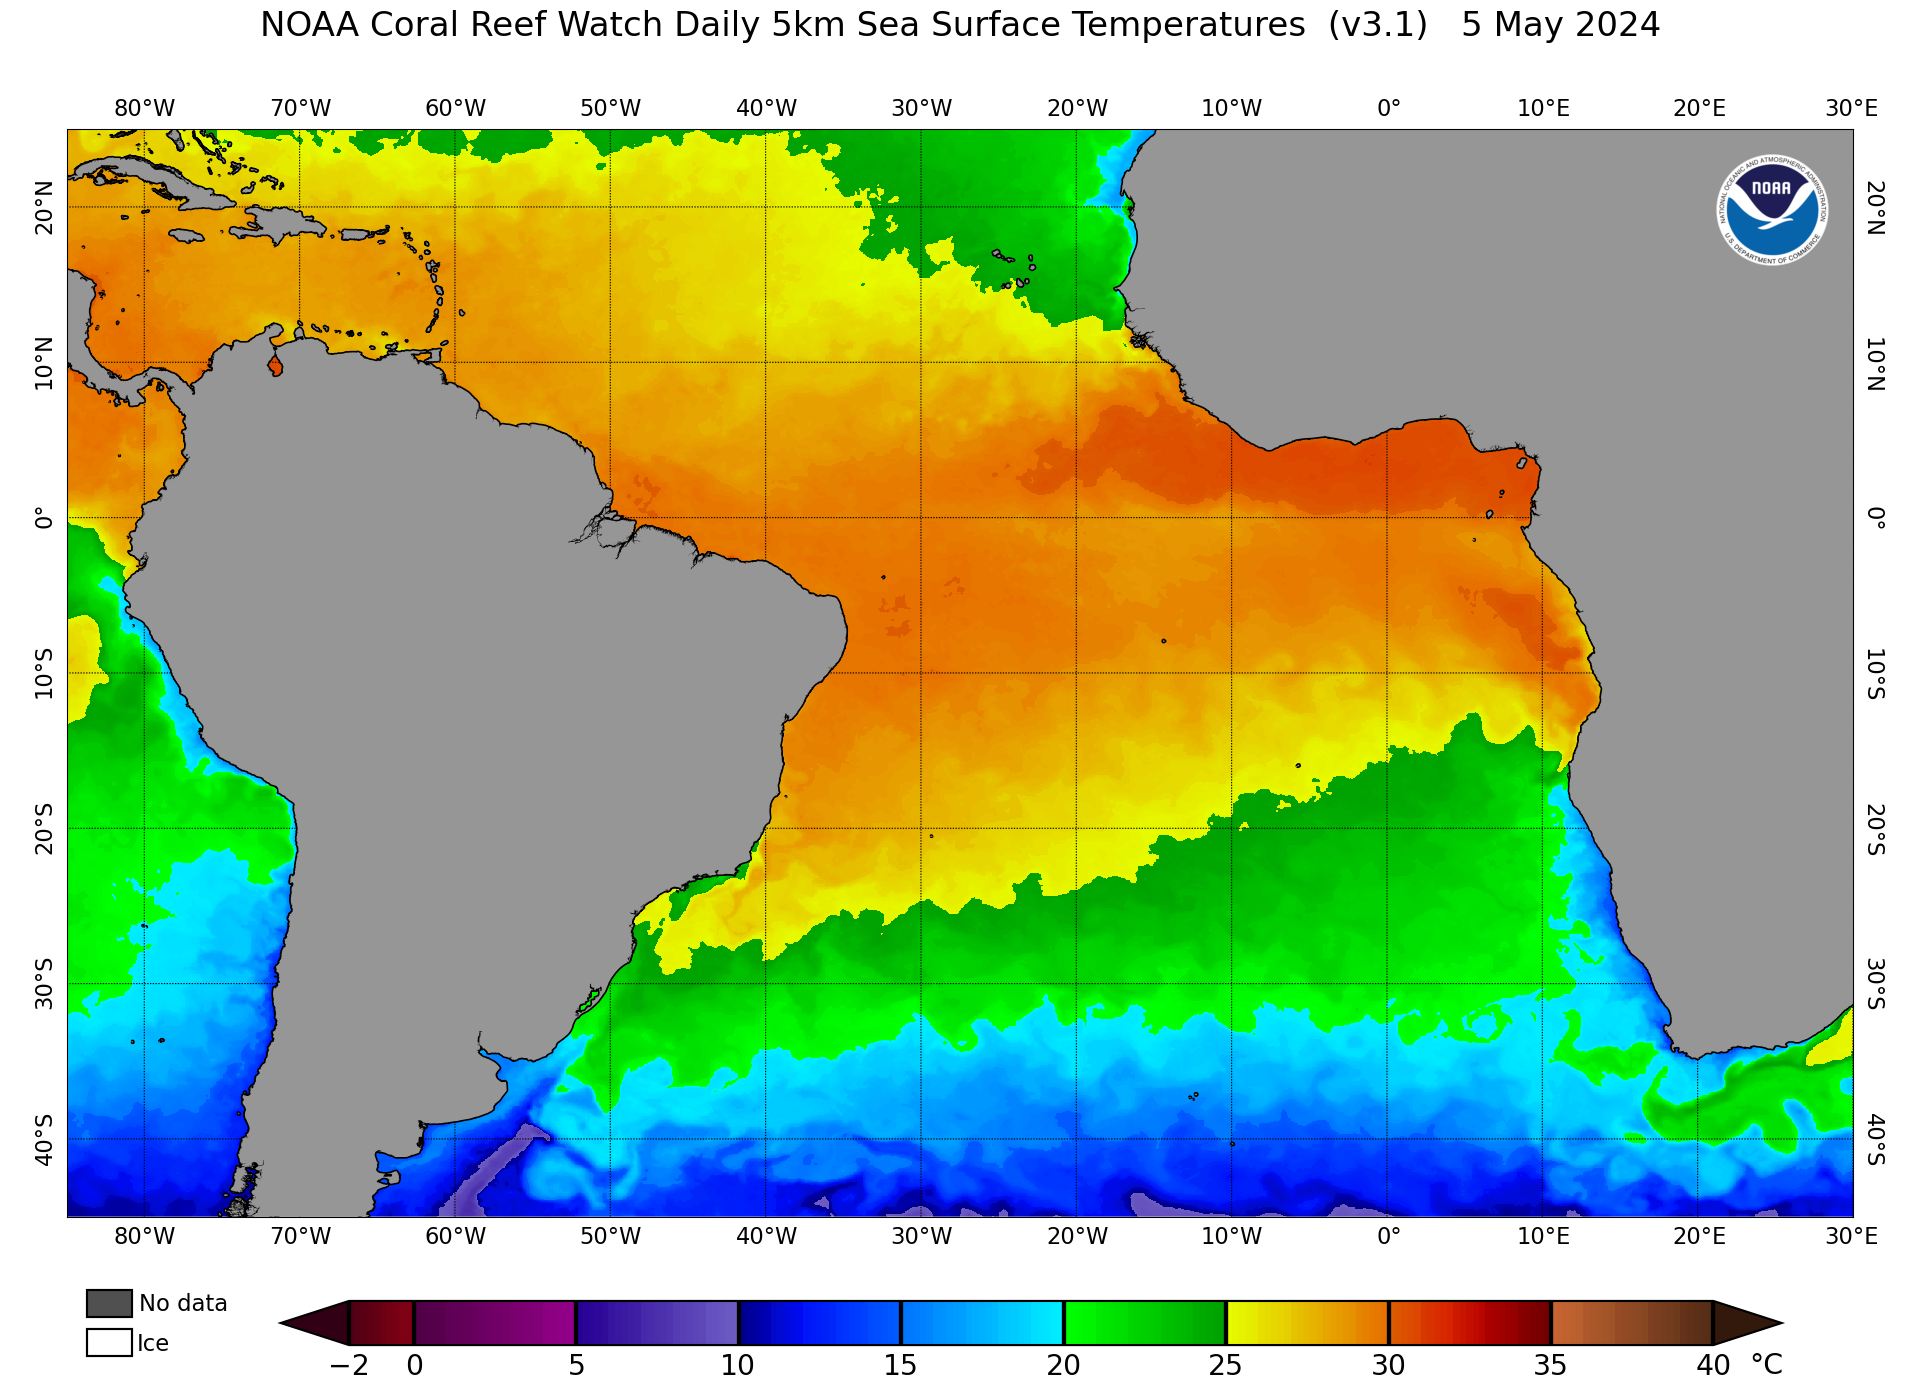 SST map - Sea Surface Temperature. Zone: South Atlantic